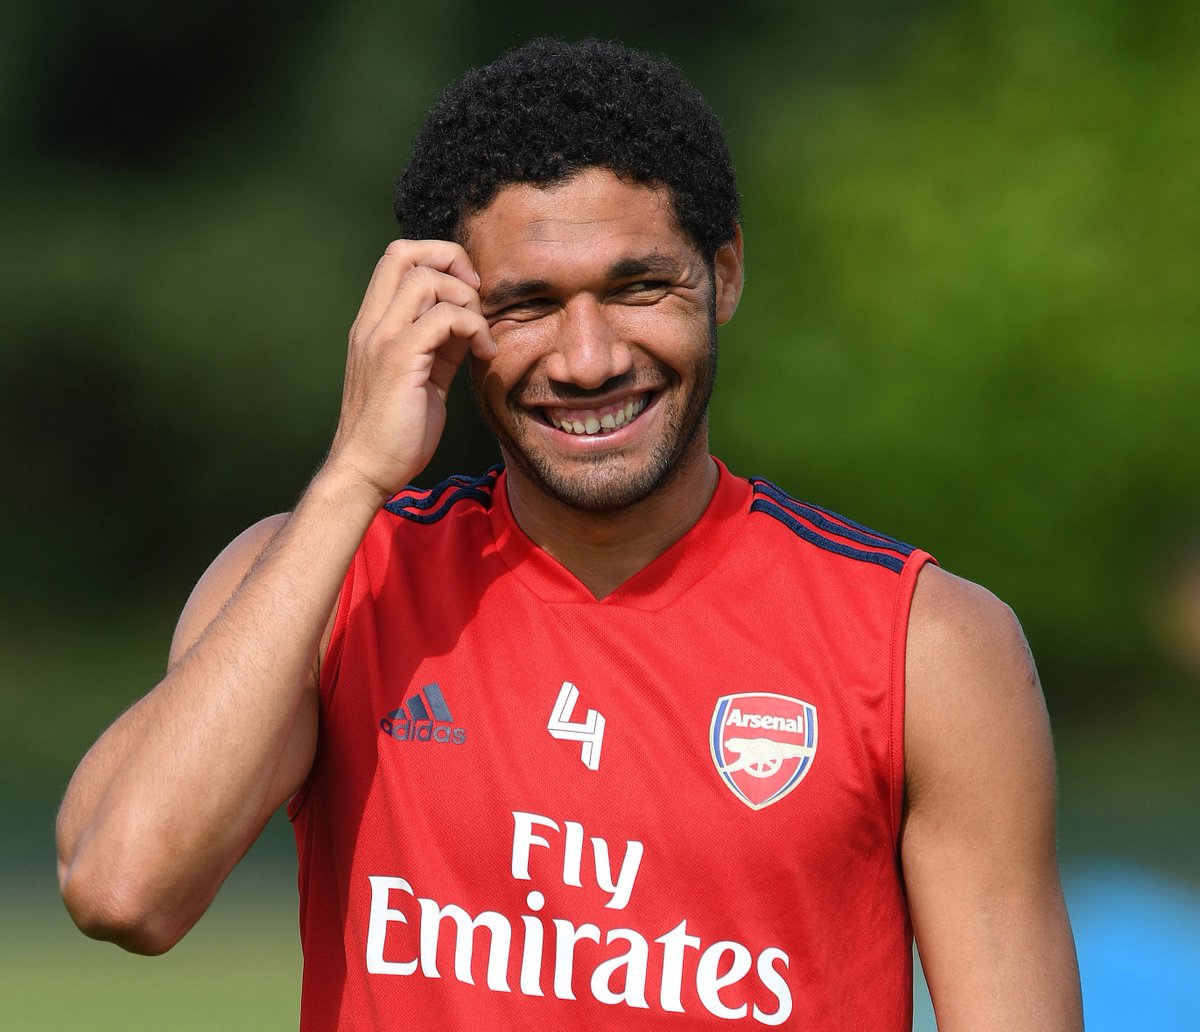 The best Egyptian in the league, currently on loan at Besiktas, Mohamed Elneny is next on the list. All jokes aside, Elneny got loaned out for a reason, won’t get proper playing time and simply isn’t good enough. Should be sold in the summer.